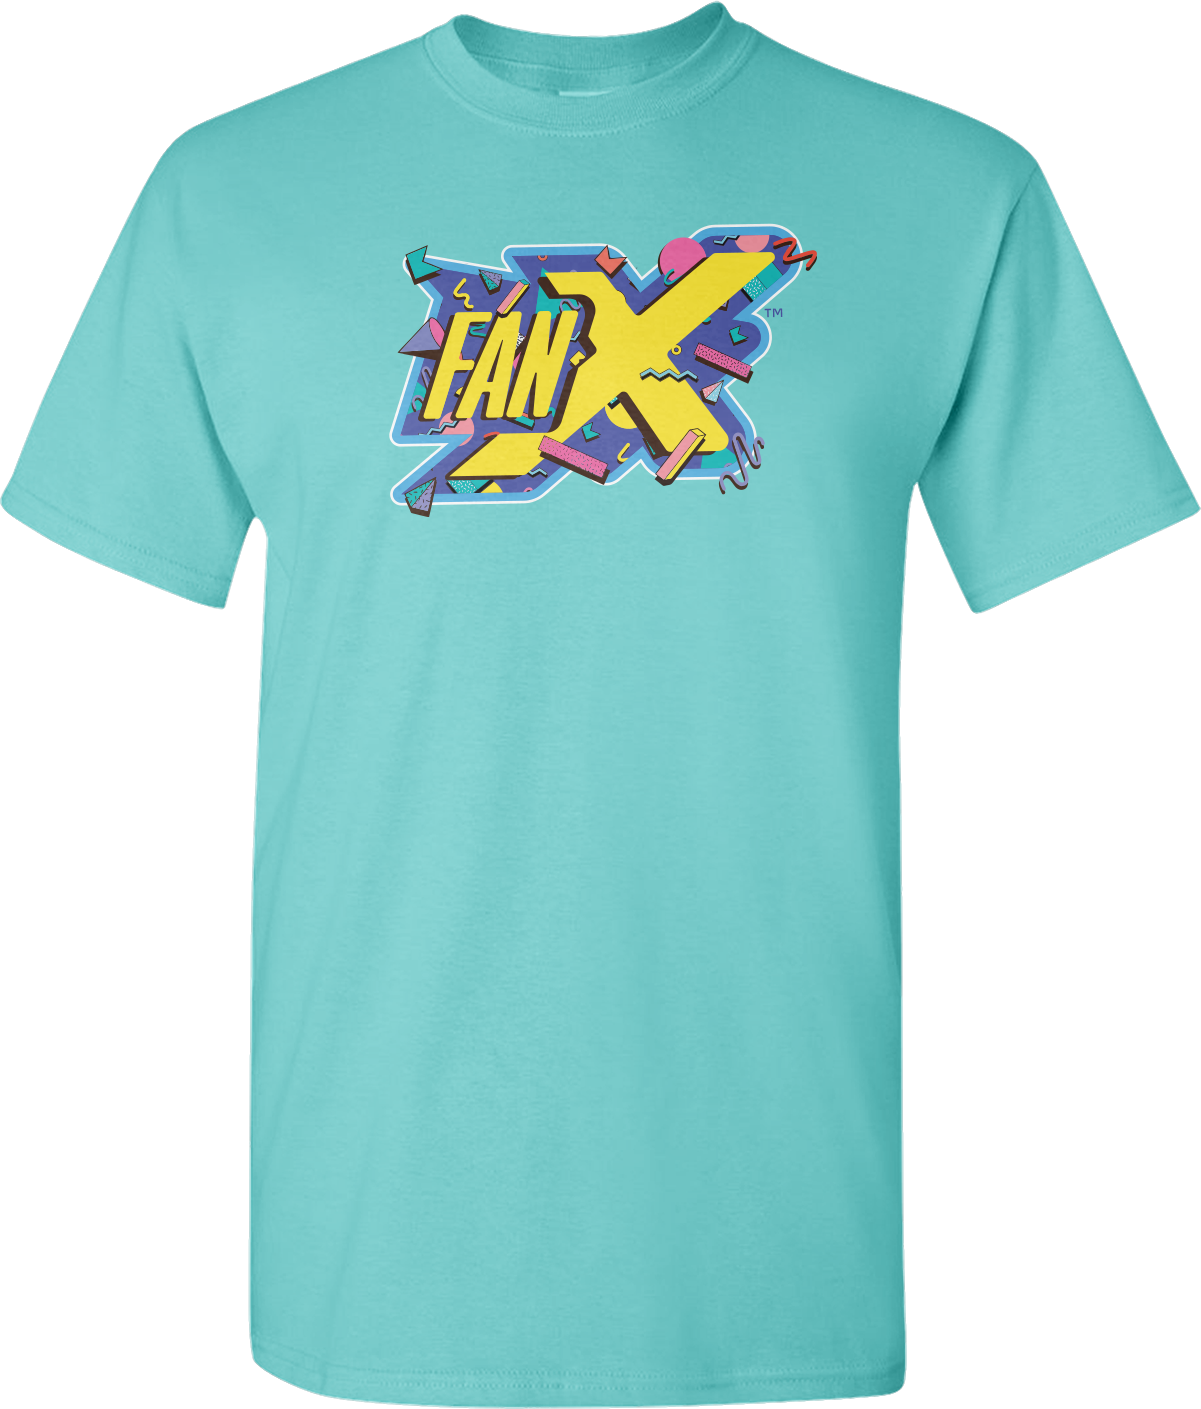 "Saved By The X" Tee